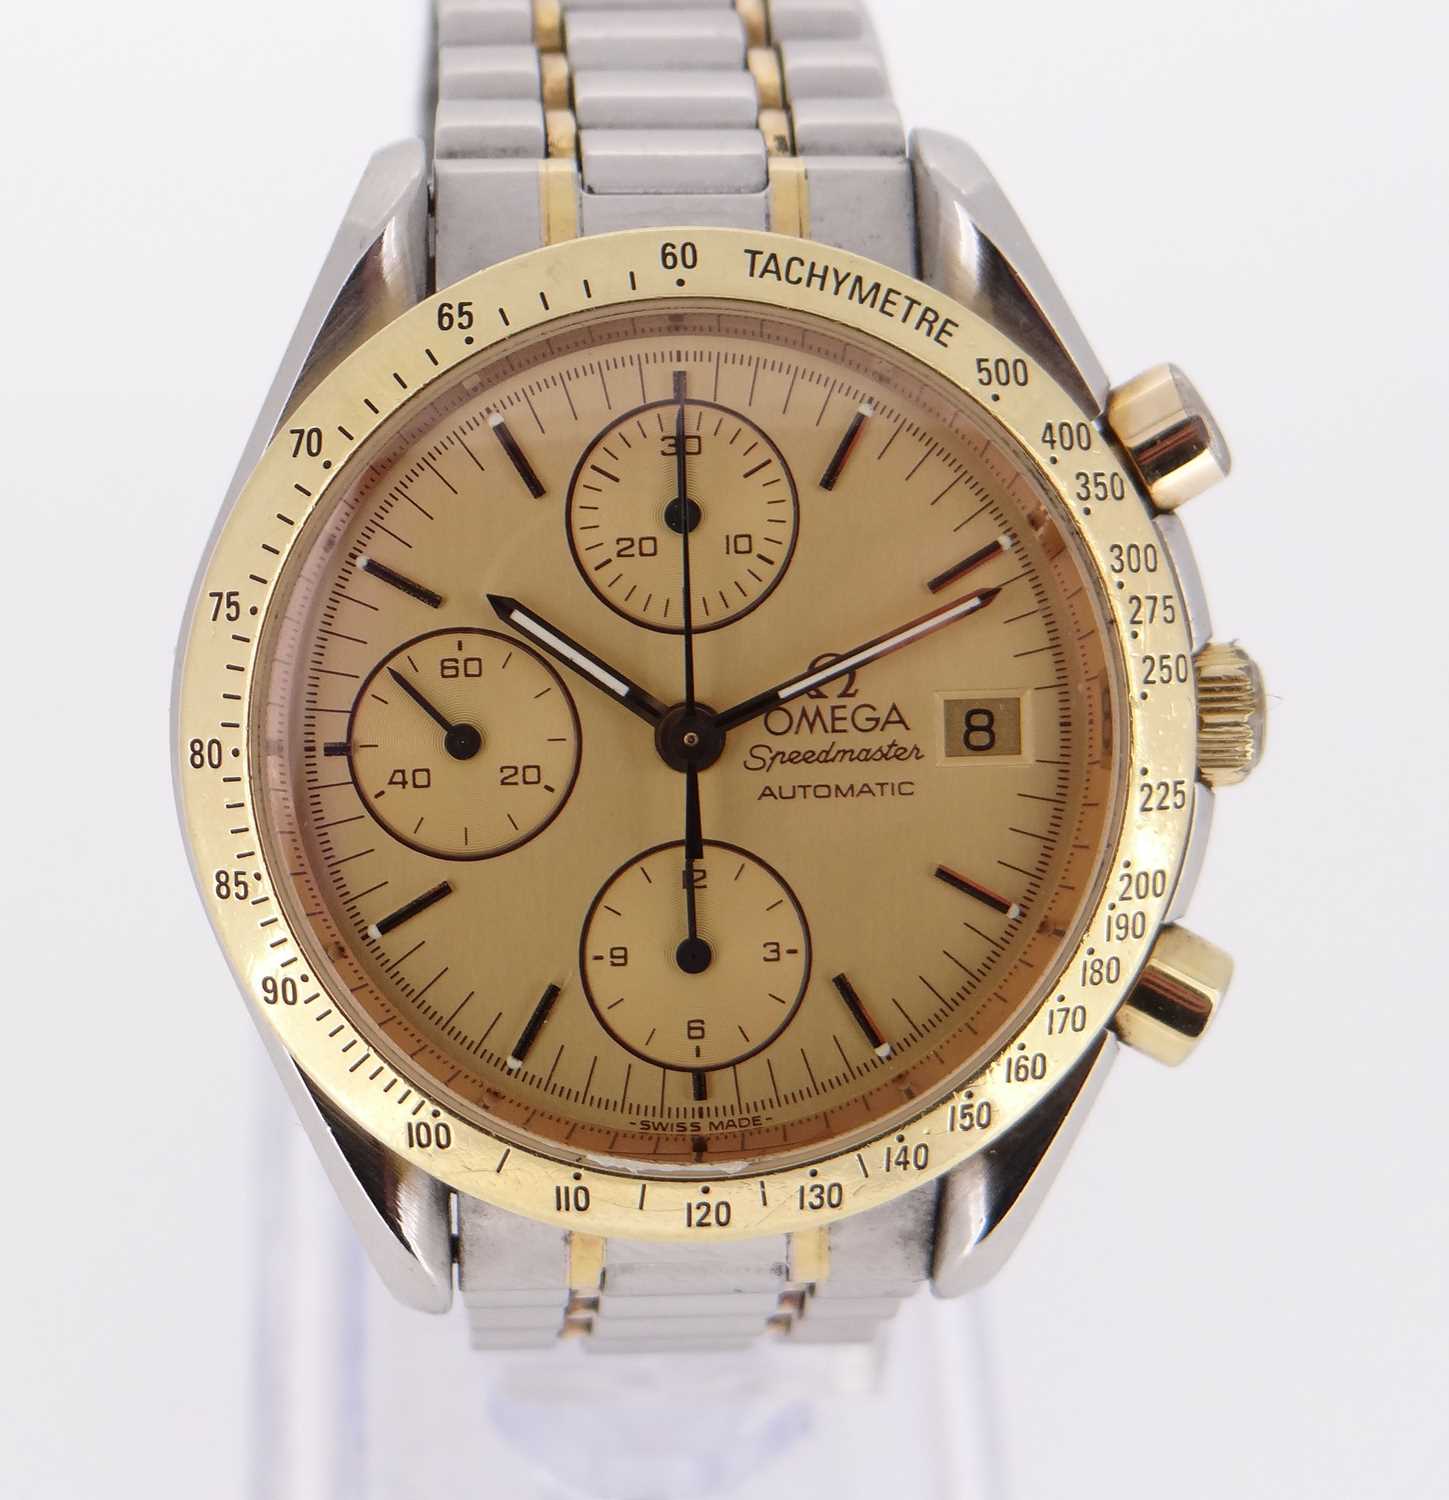 OMEGA STAINLESS STEEL & GOLD AUTOMATIC CHRONOGRAPH BRACELET WATCH, c.1990s - Image 2 of 17